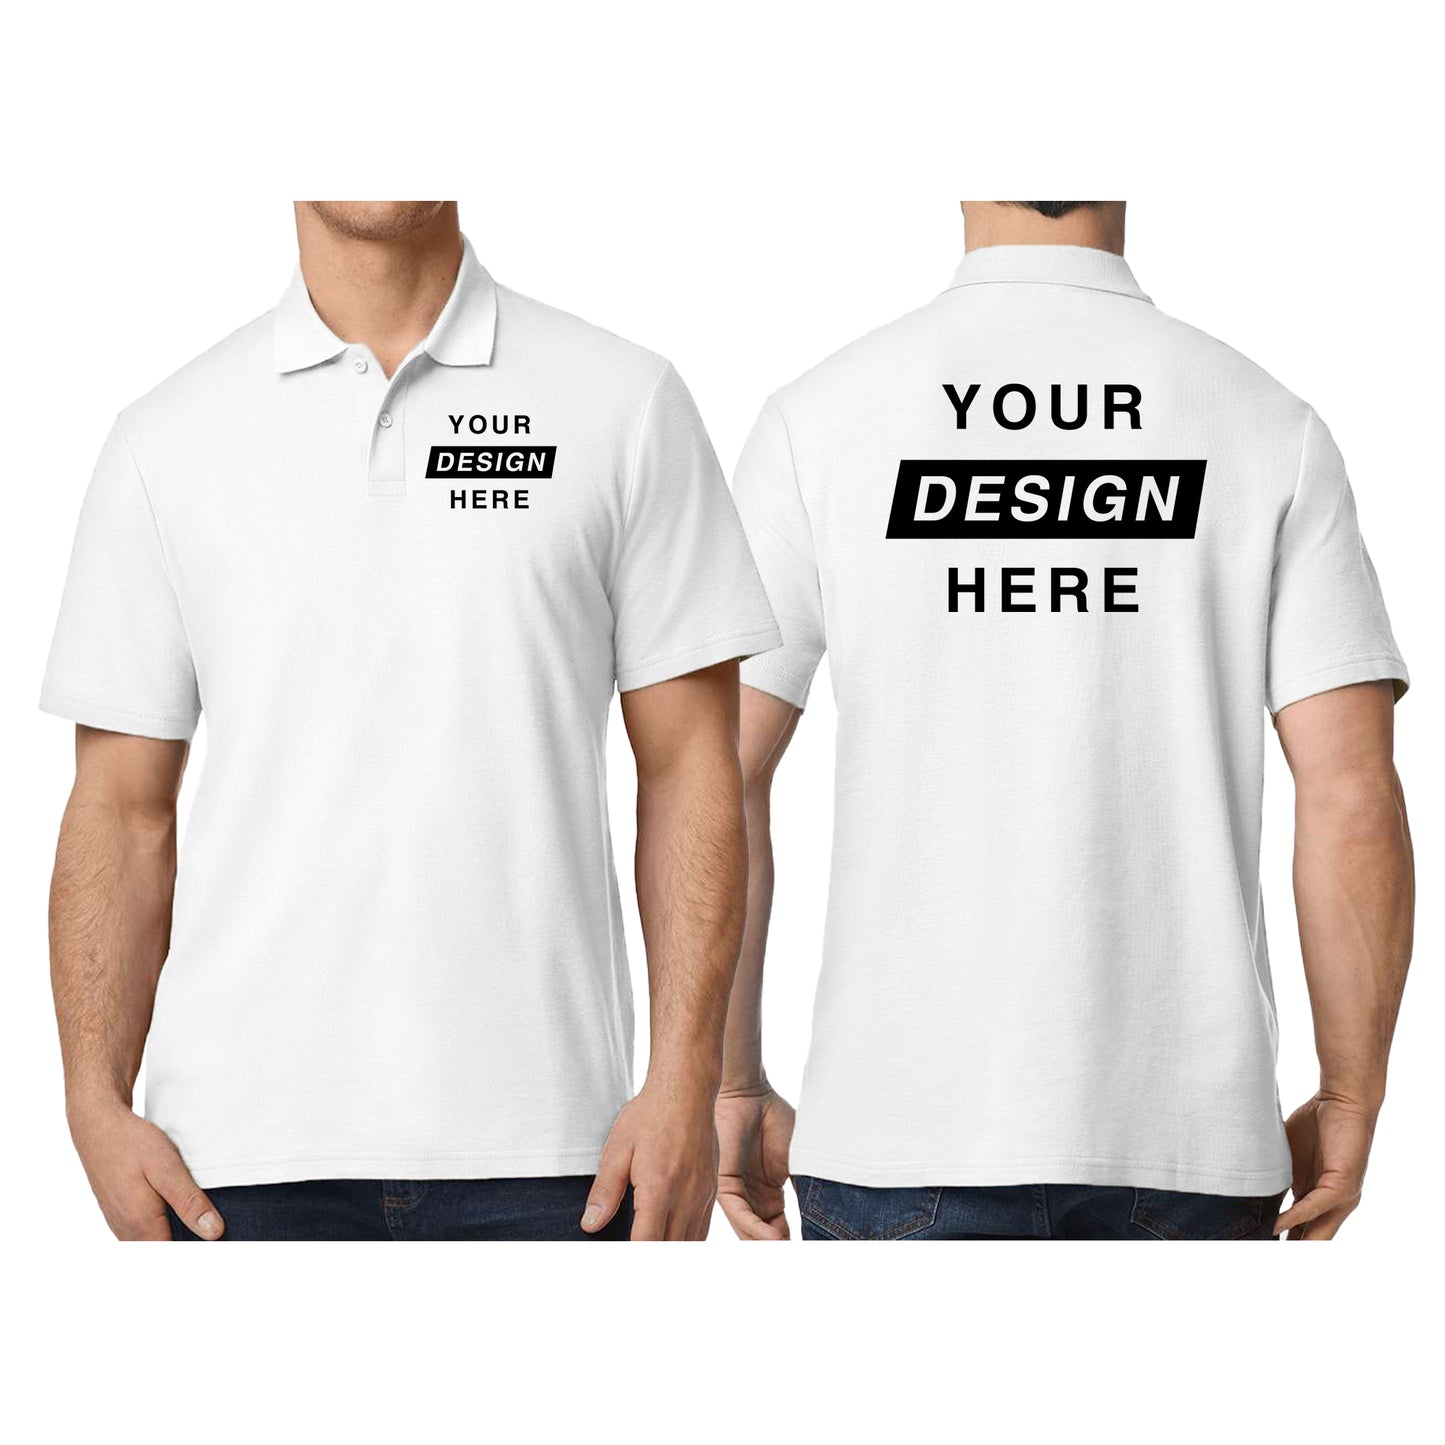 Mens Polo Shirt - Design Your Own - Front & Back